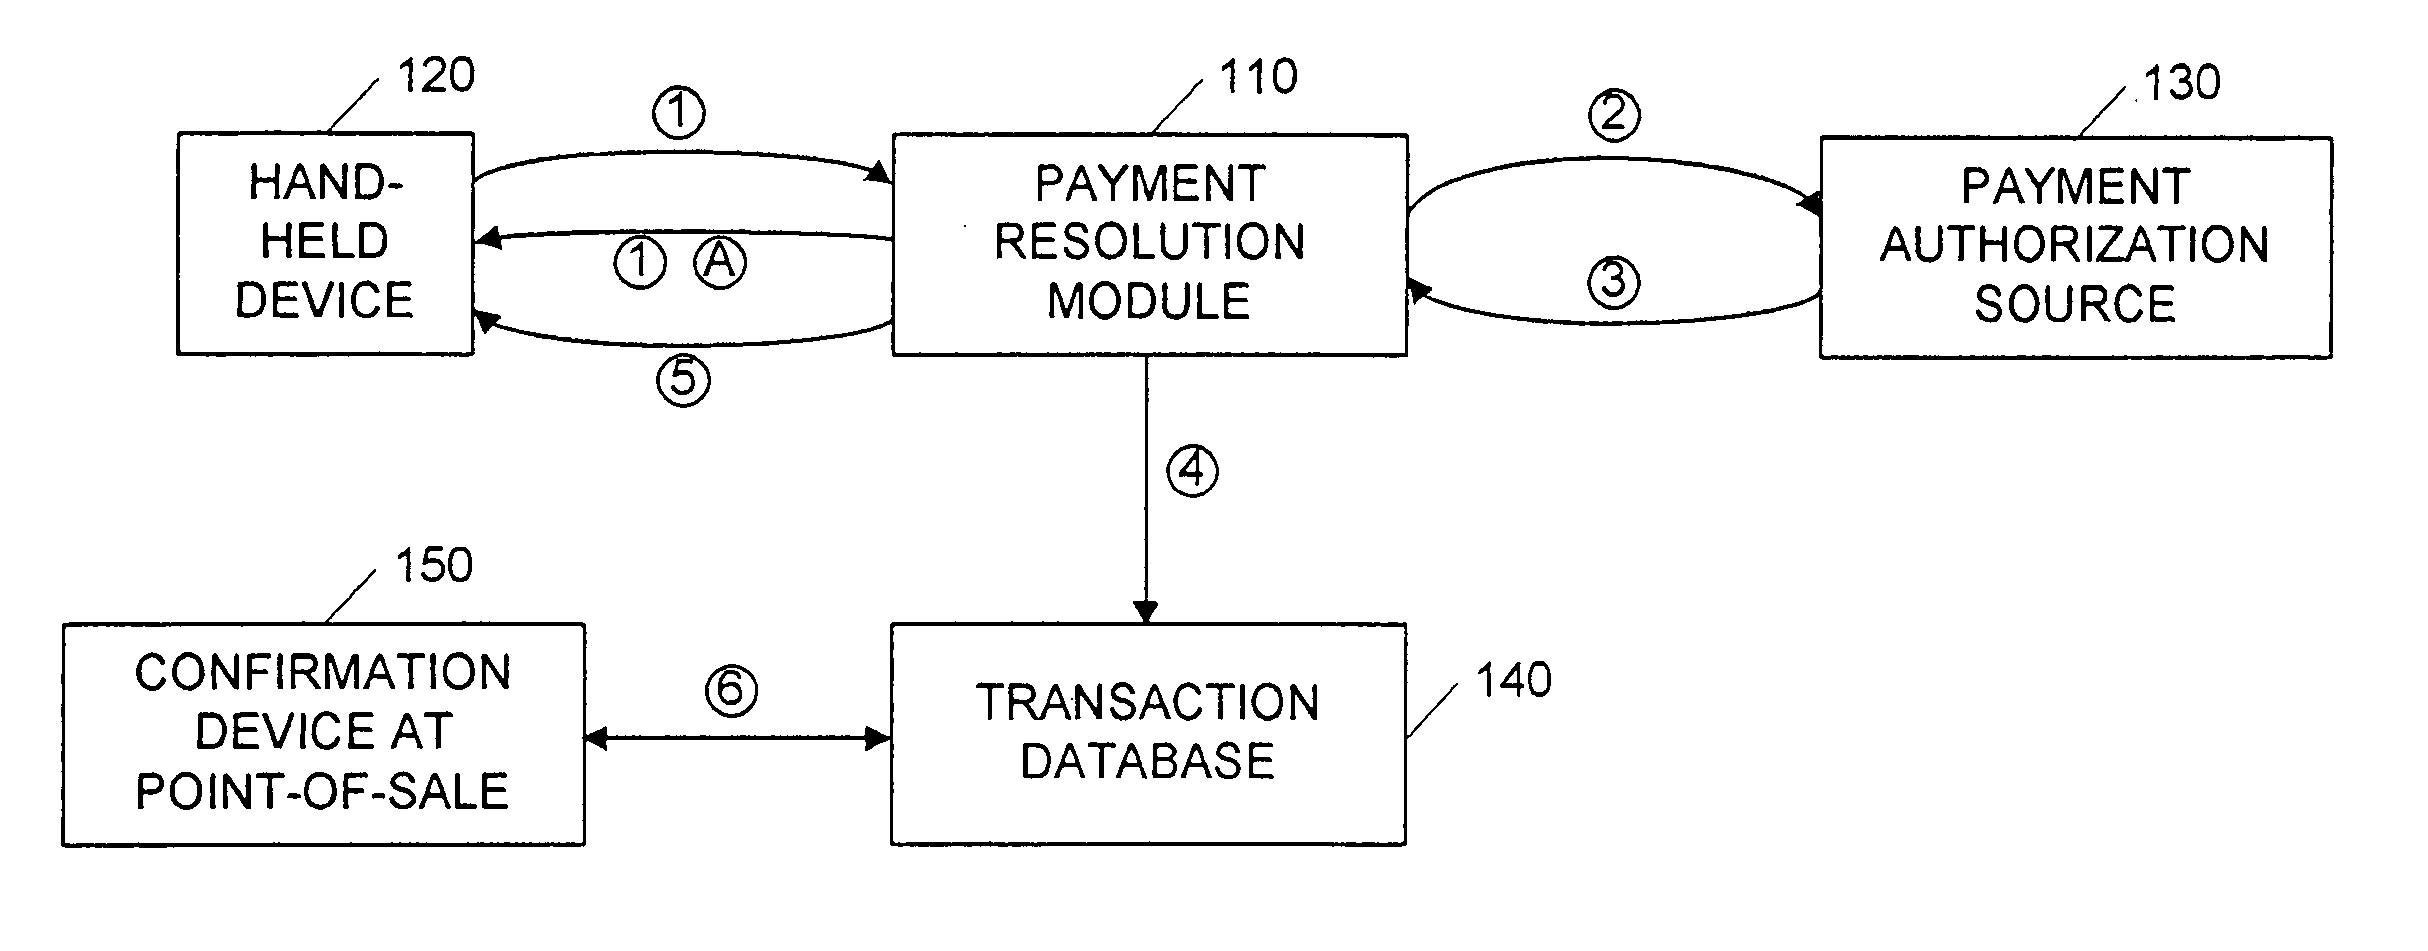 Secure money transfer between hand-held devices